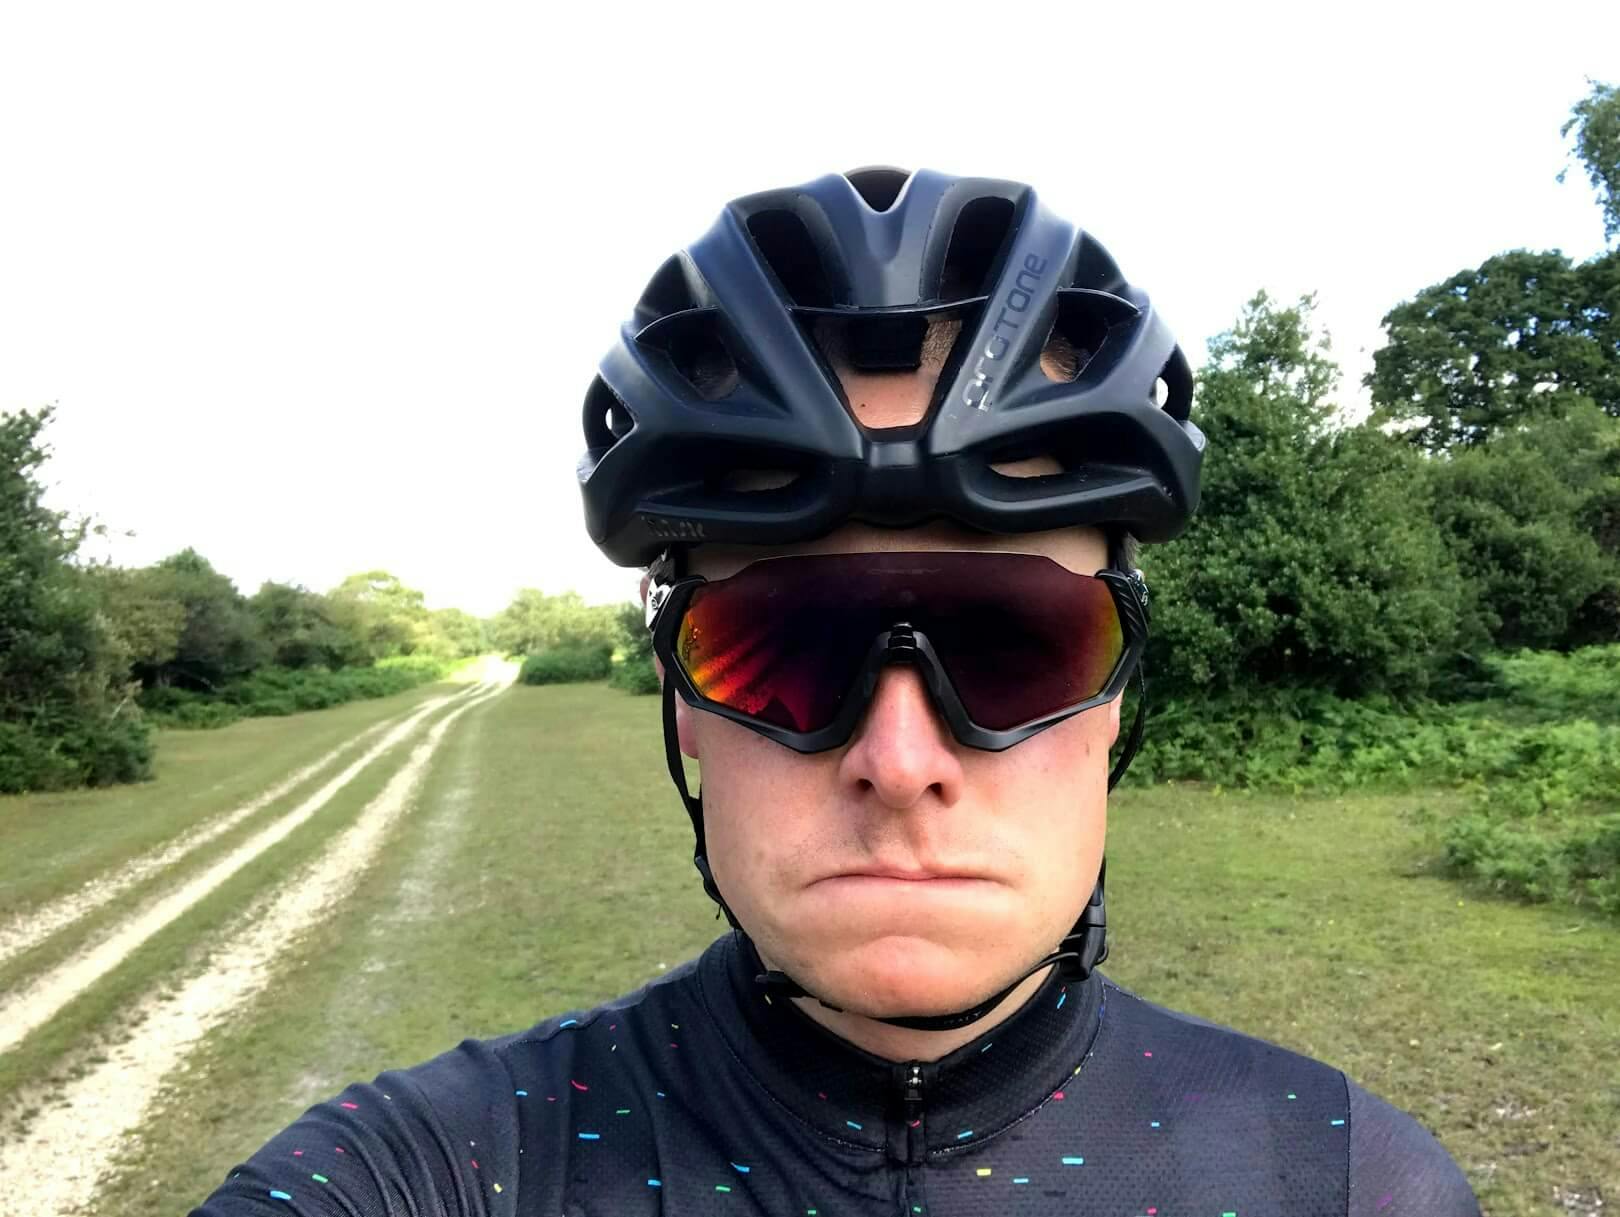 Matt Moore Freelance Web Developer serious looking selfie when out on a ride in the New Forest